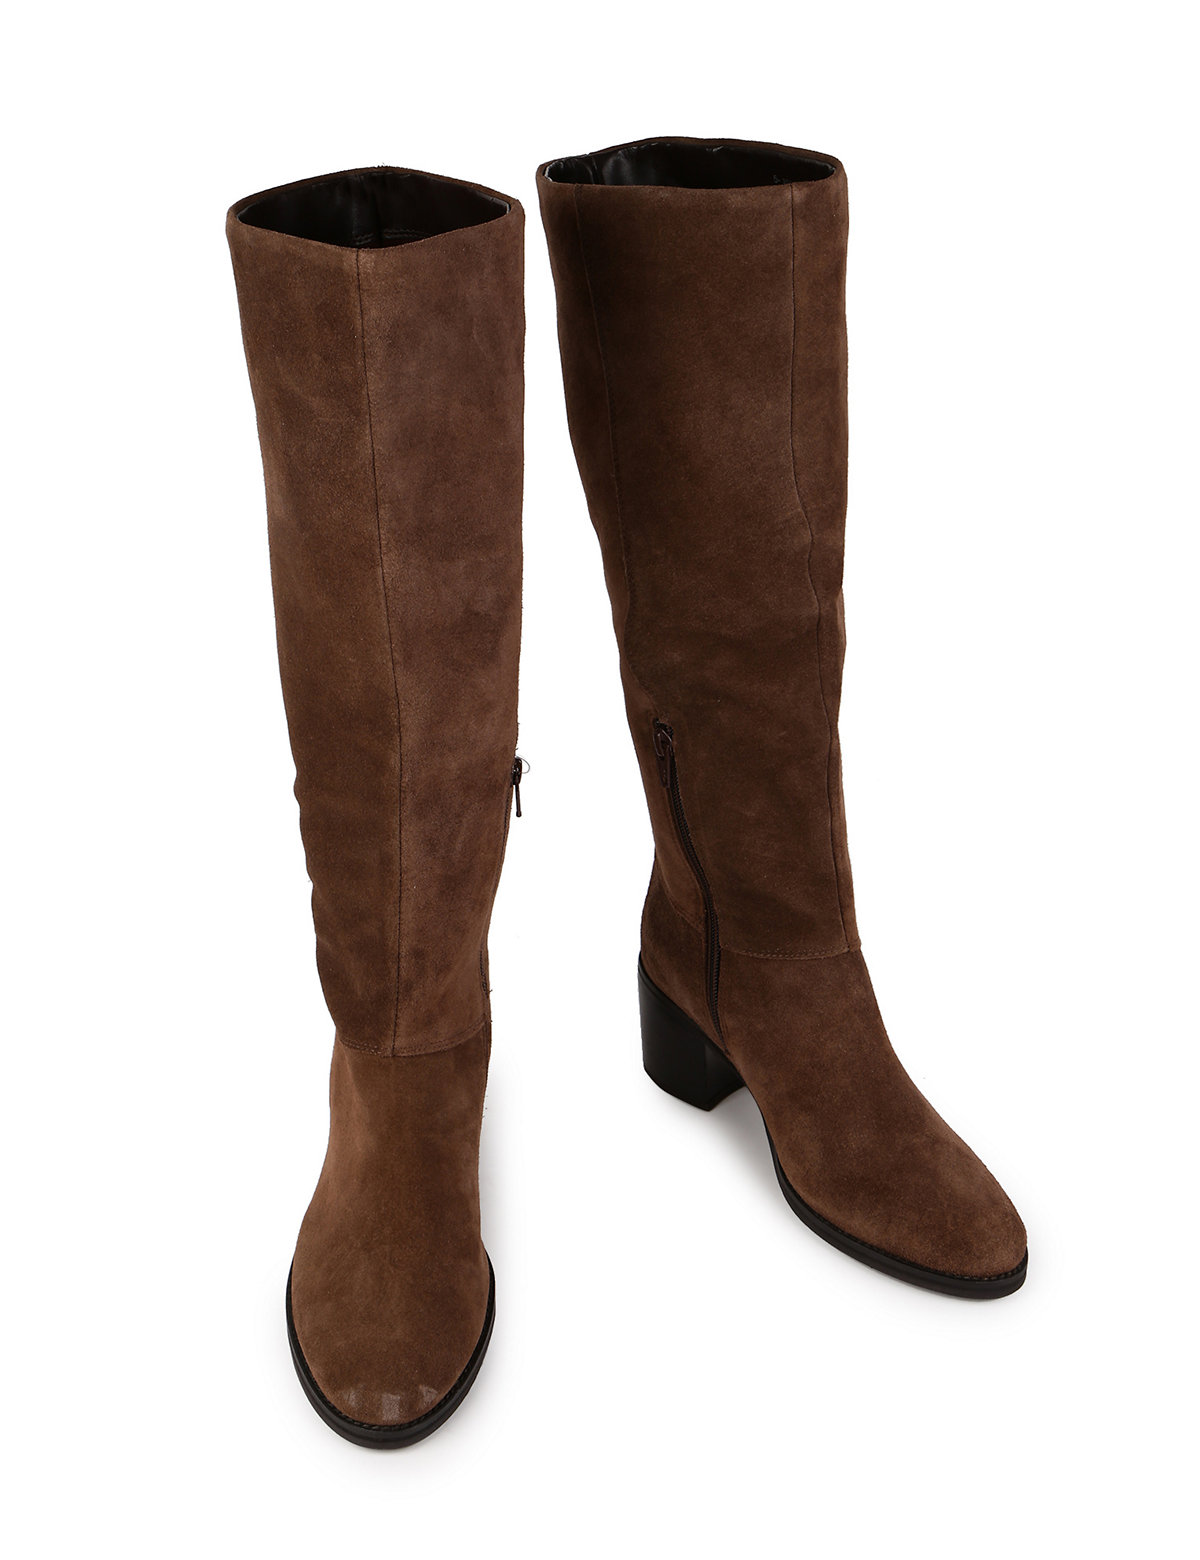 Leather Plain Standard Fit High Boots